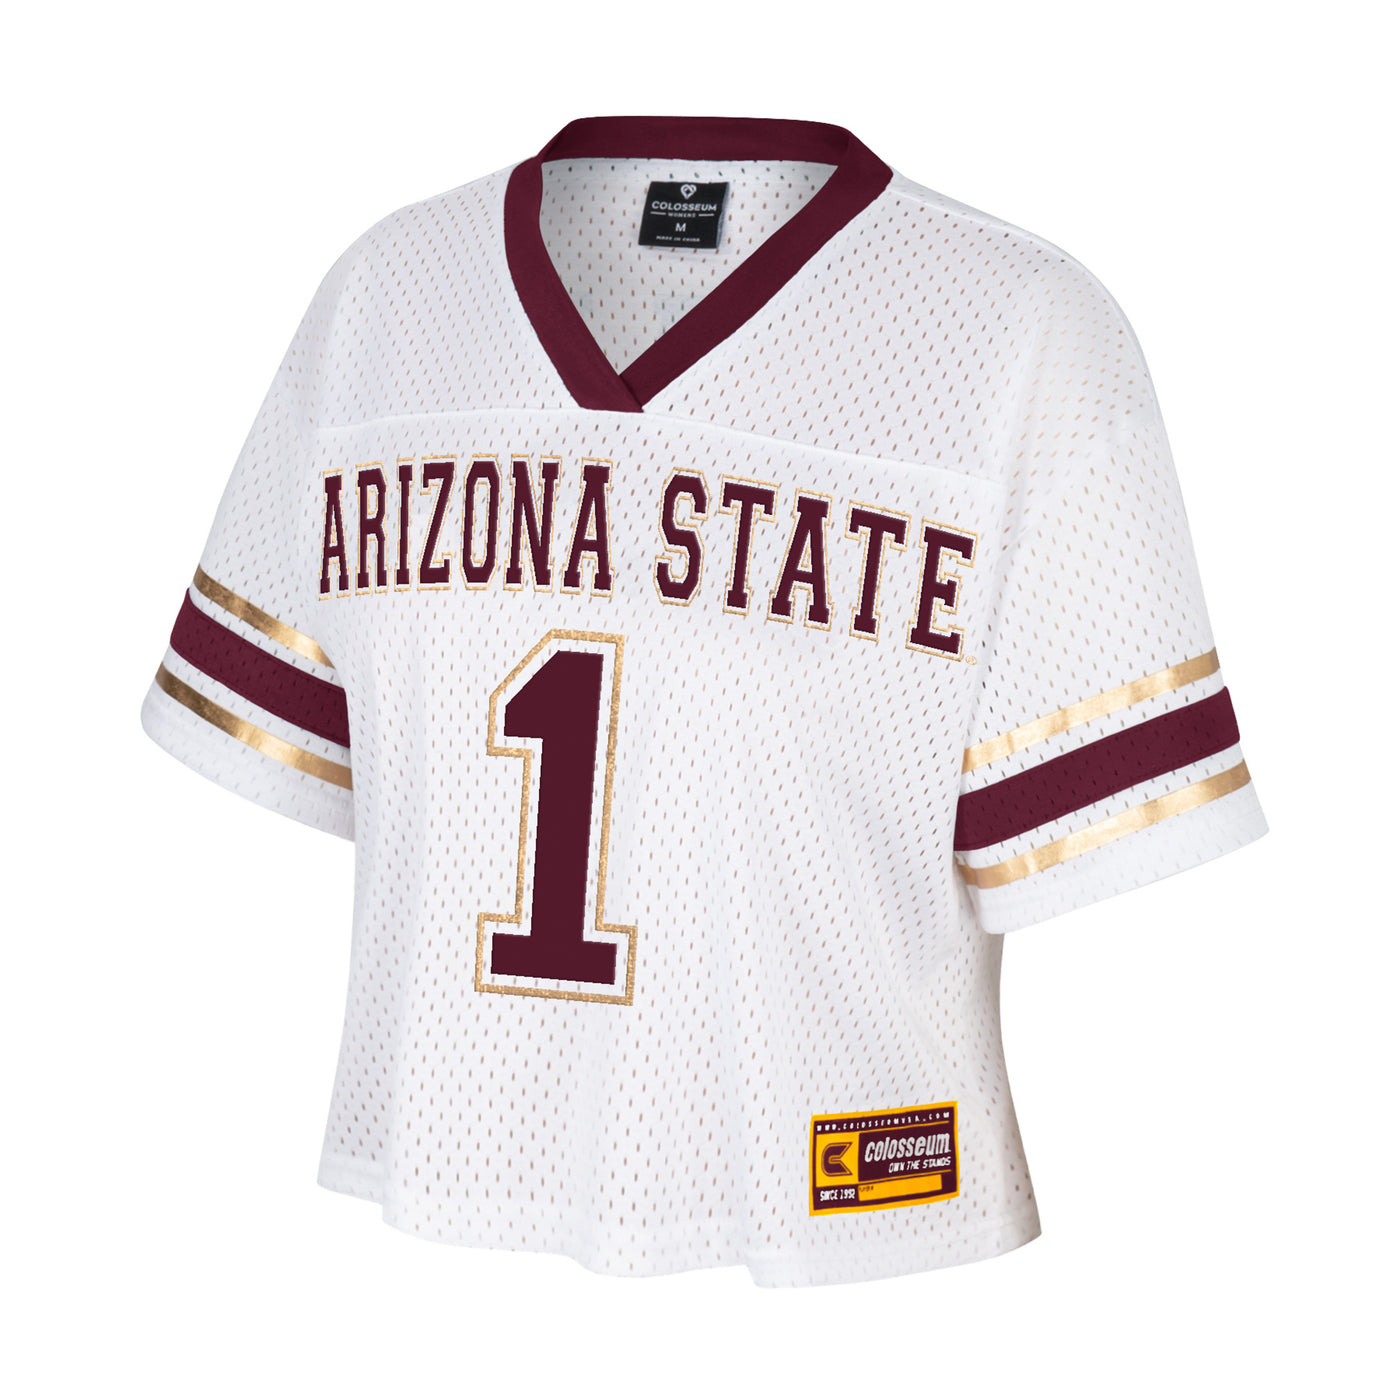 ASU cropped women's jersey. The neckline is trimmed with maroon. The arm bands have two metallic gold stripes surrounding a maroon stripe. There is the text 